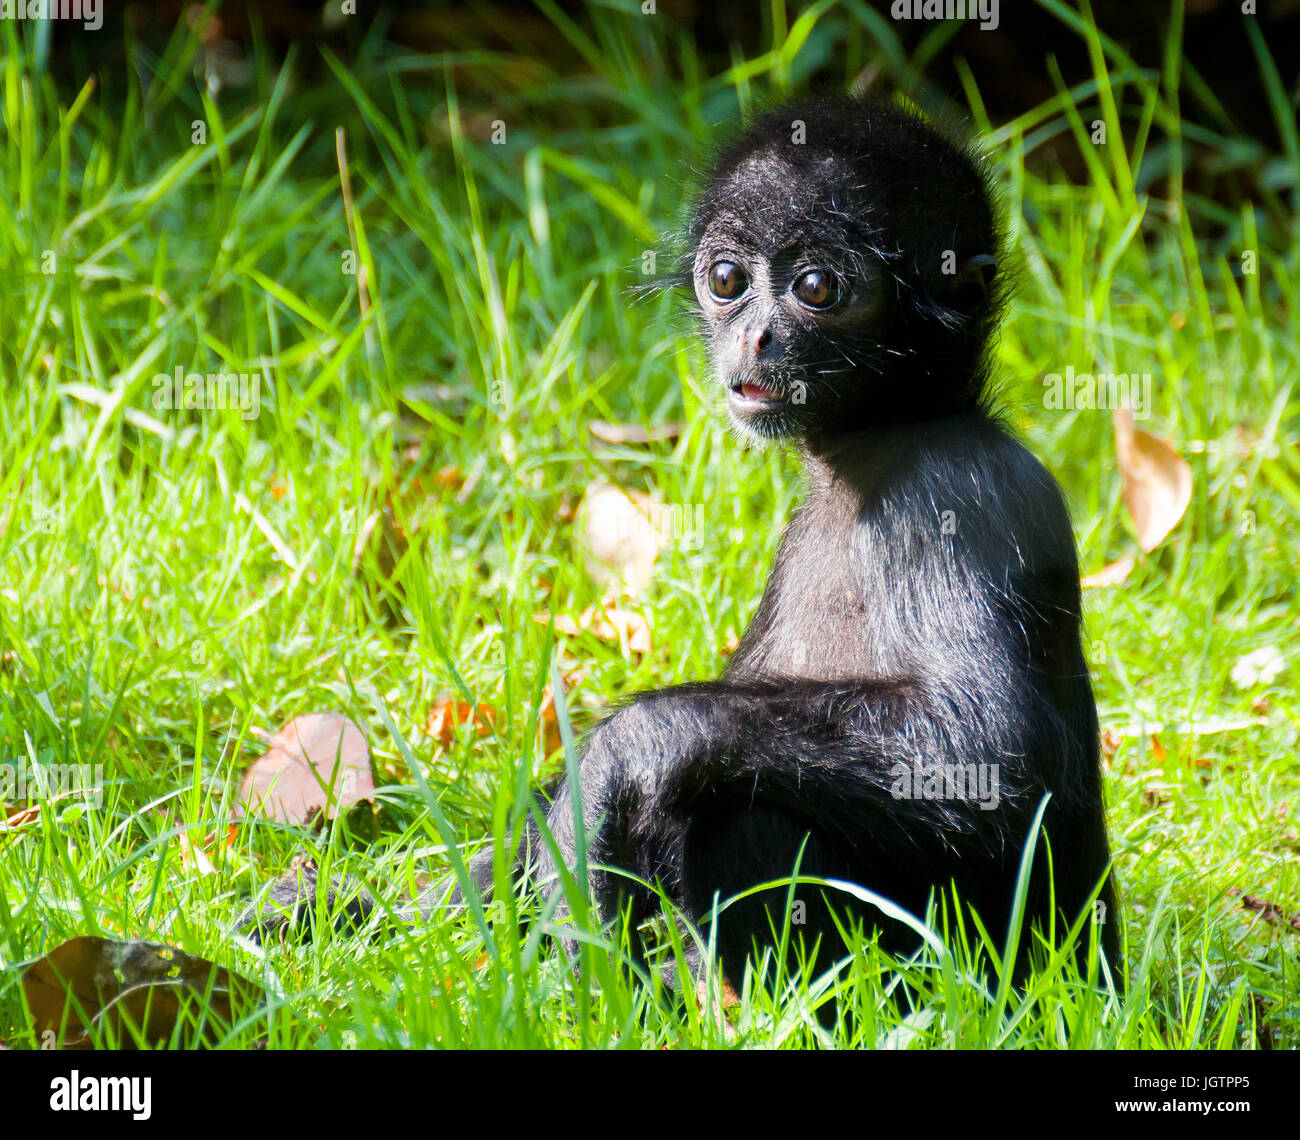 A young black-headed spider monkey Stock Photo